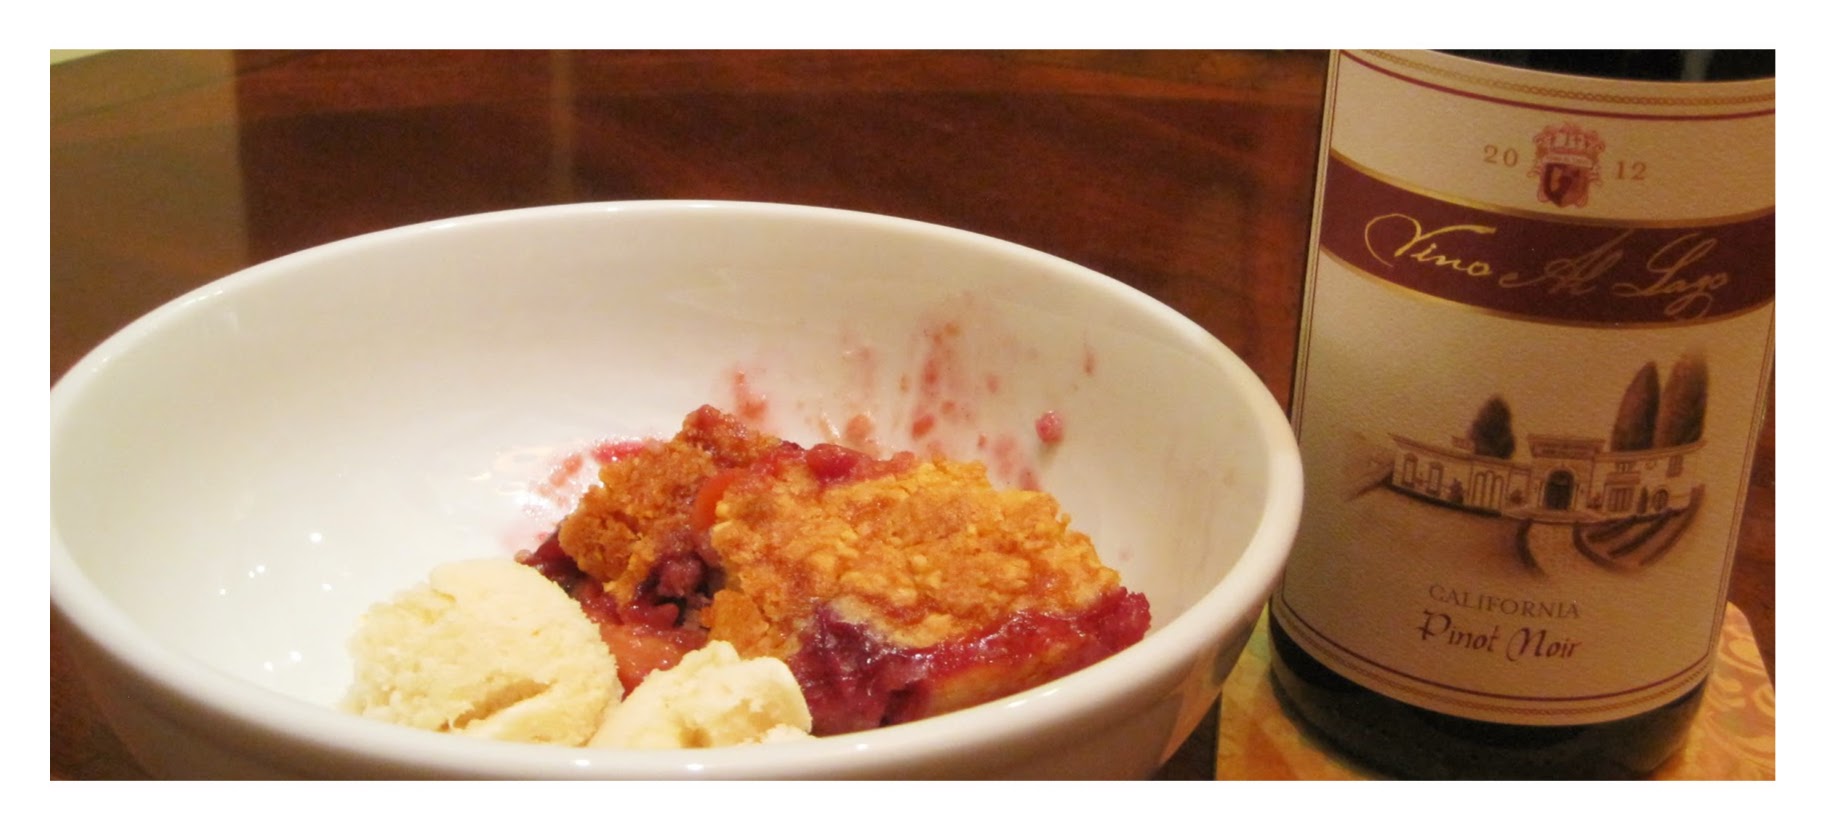 Peach and Blueberry Crisp with Almond and Lemon Topping recipe image